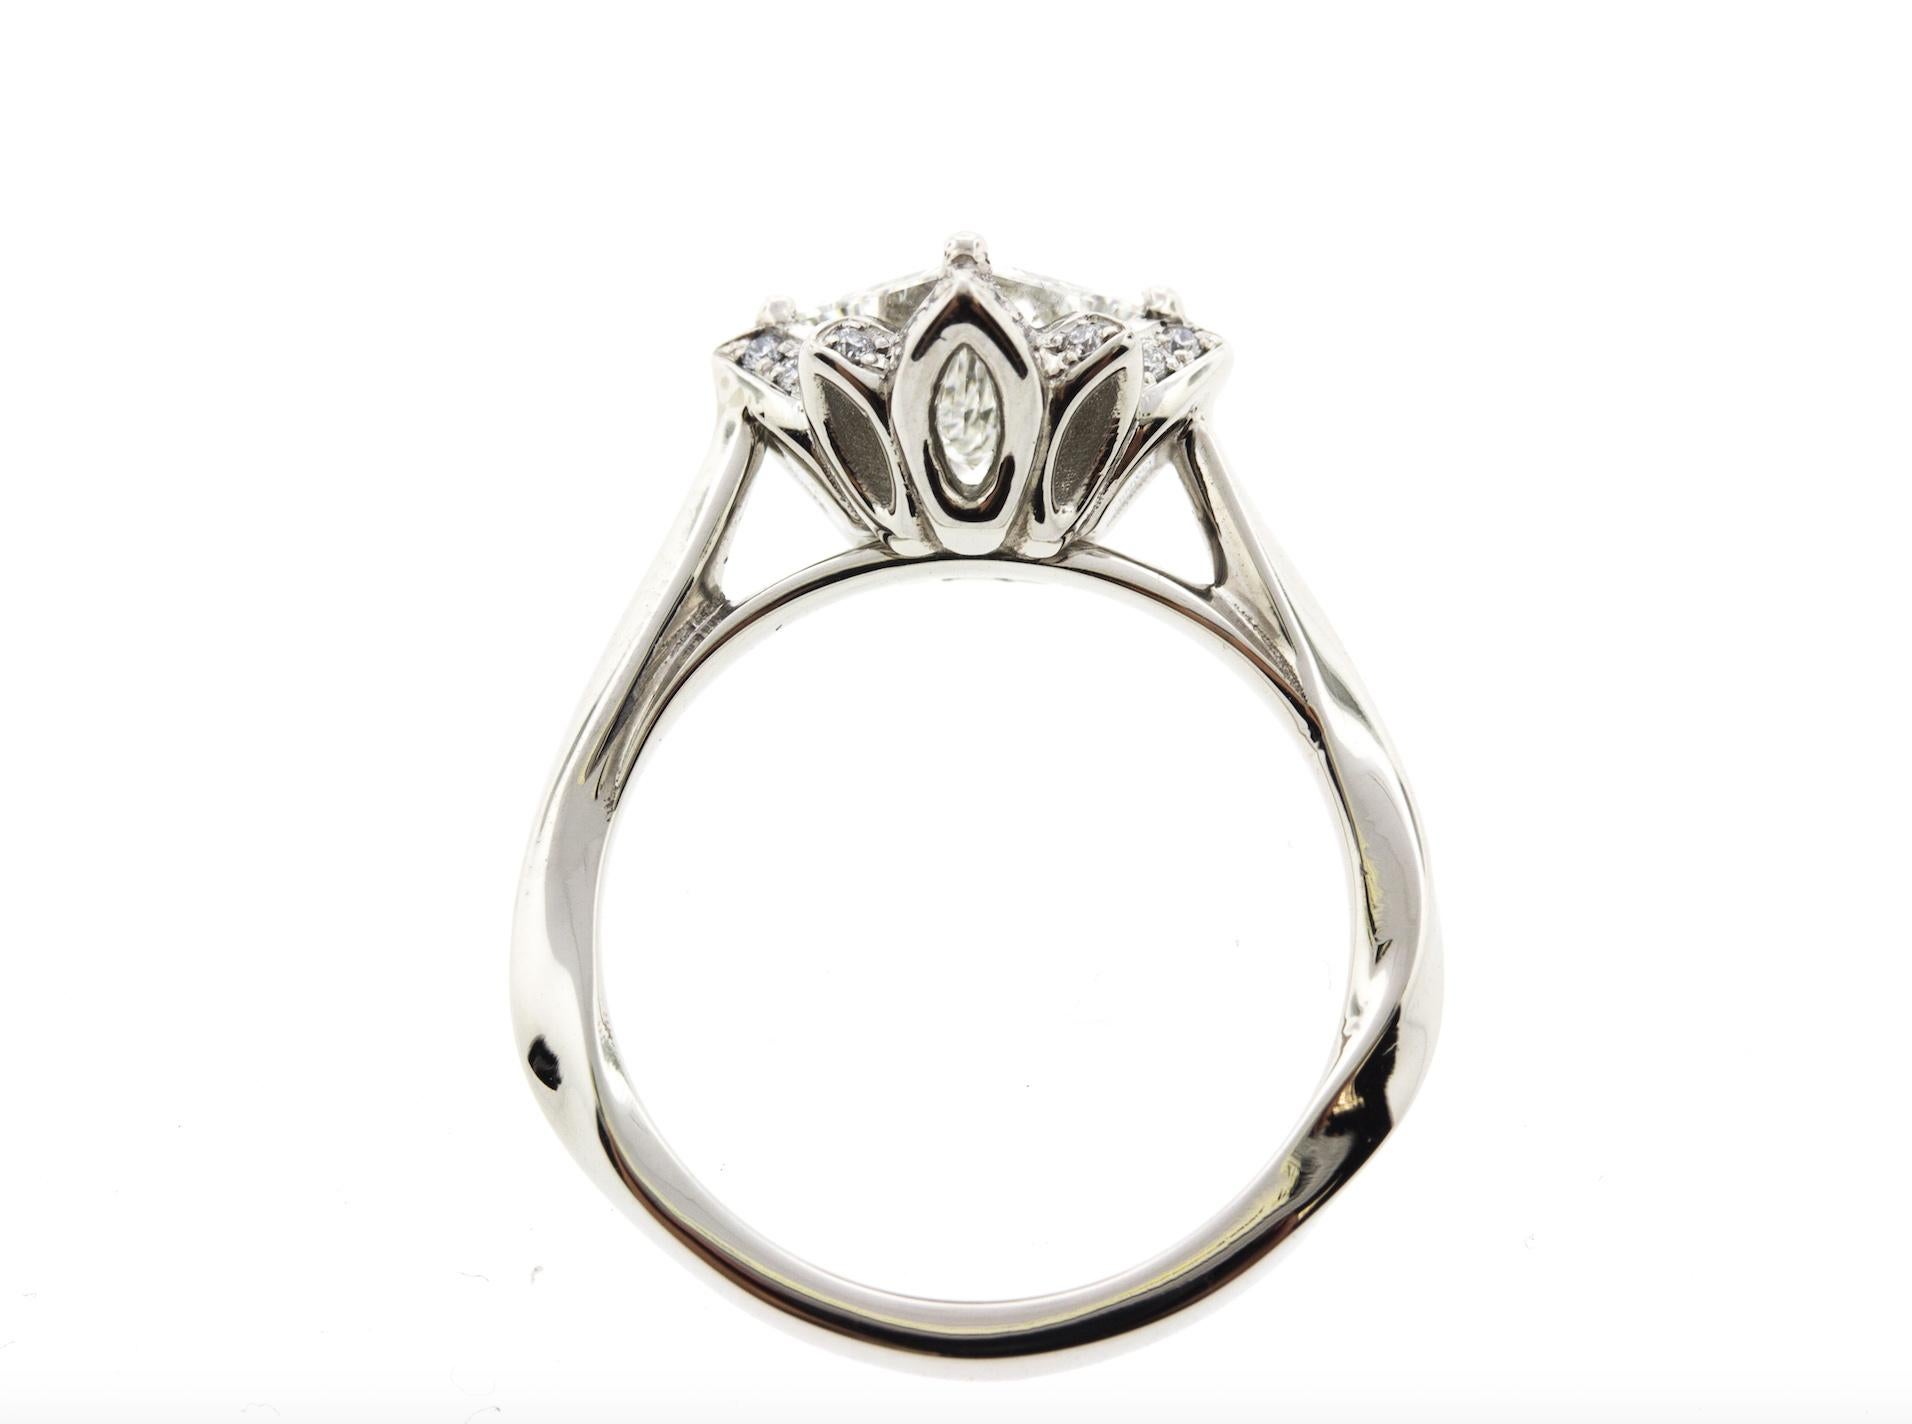 This platinum flower engagement ring is inspired by nature and features a princess cut diamond in the center.  Crafted in Platinum, this flower ring contains a Princess cut Diamond (1.00 total carat weight, G color, SI2 clarity) and is surrounded by